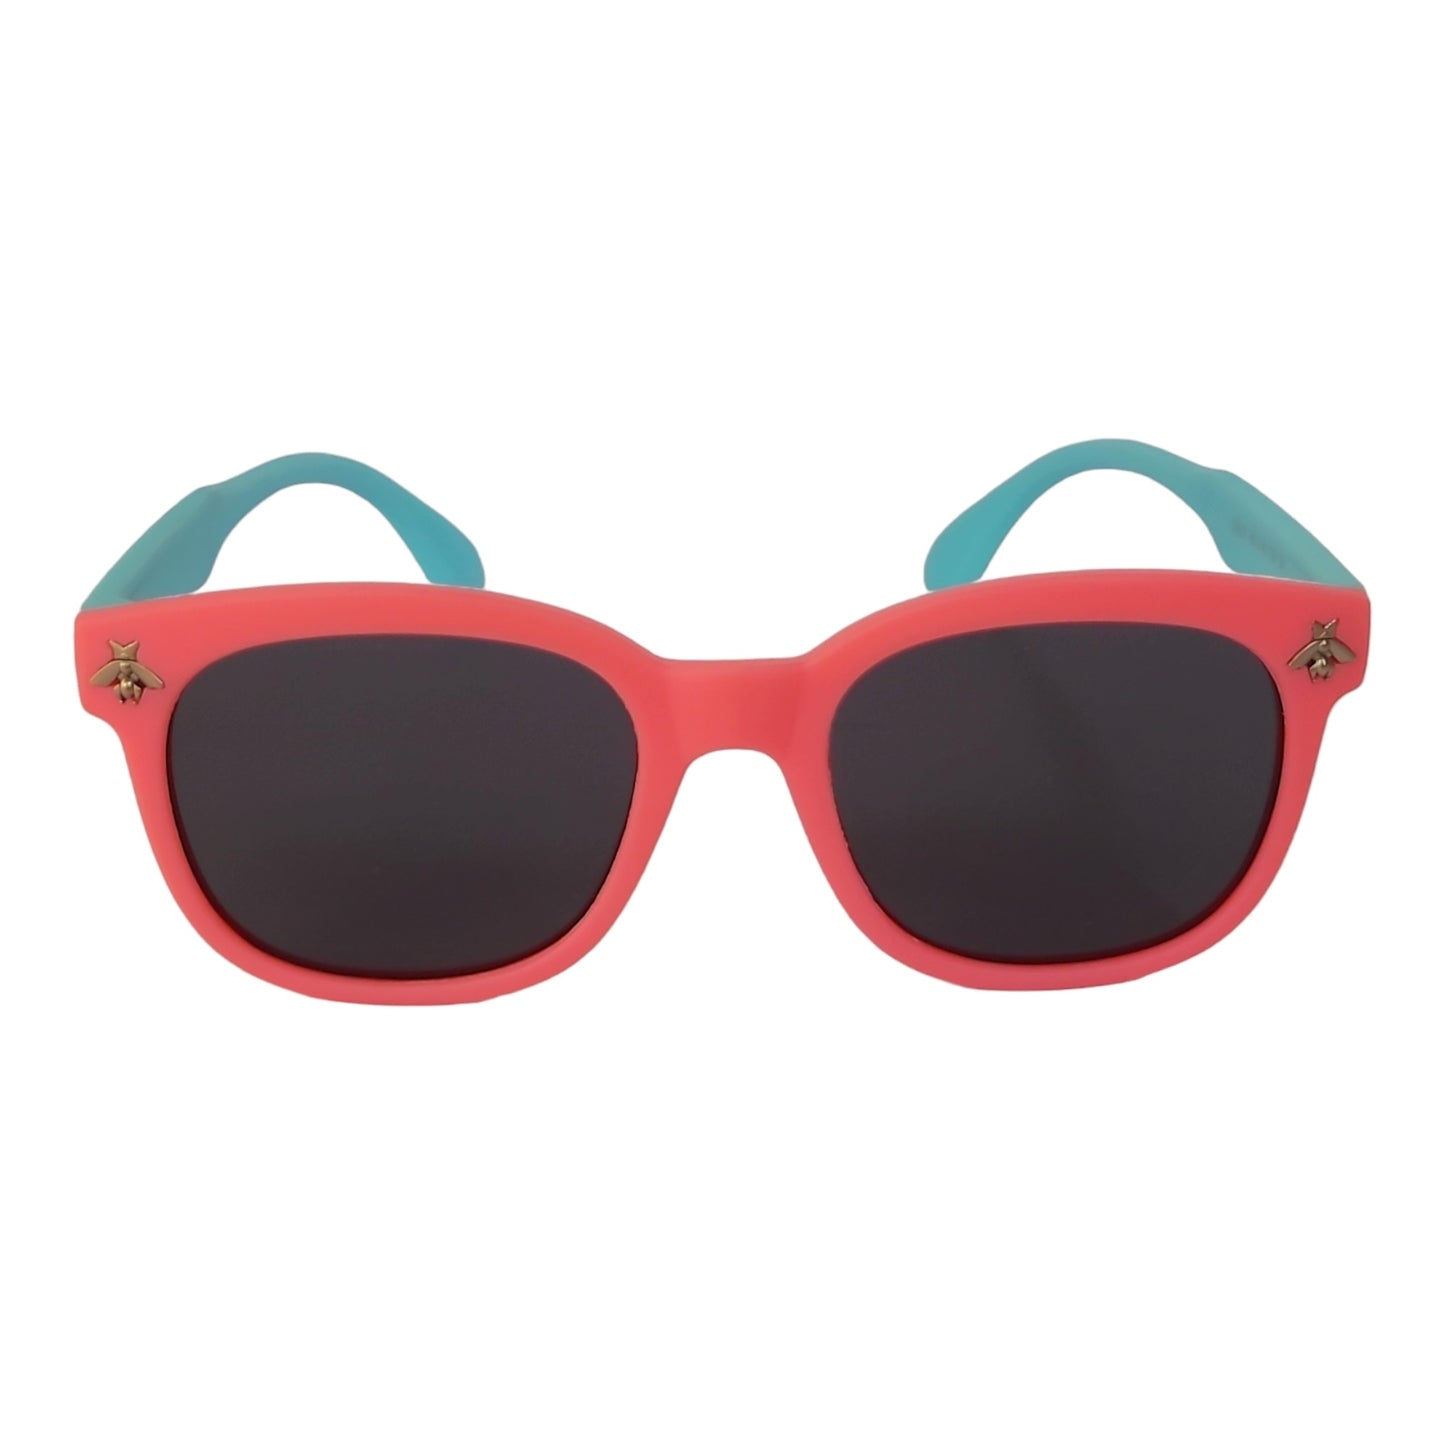 Stylish Kids Polarized Sunglasses for Shades Age 4-9 Years Old, Girl or Boy  | affaires-9011 - Pink-Blue